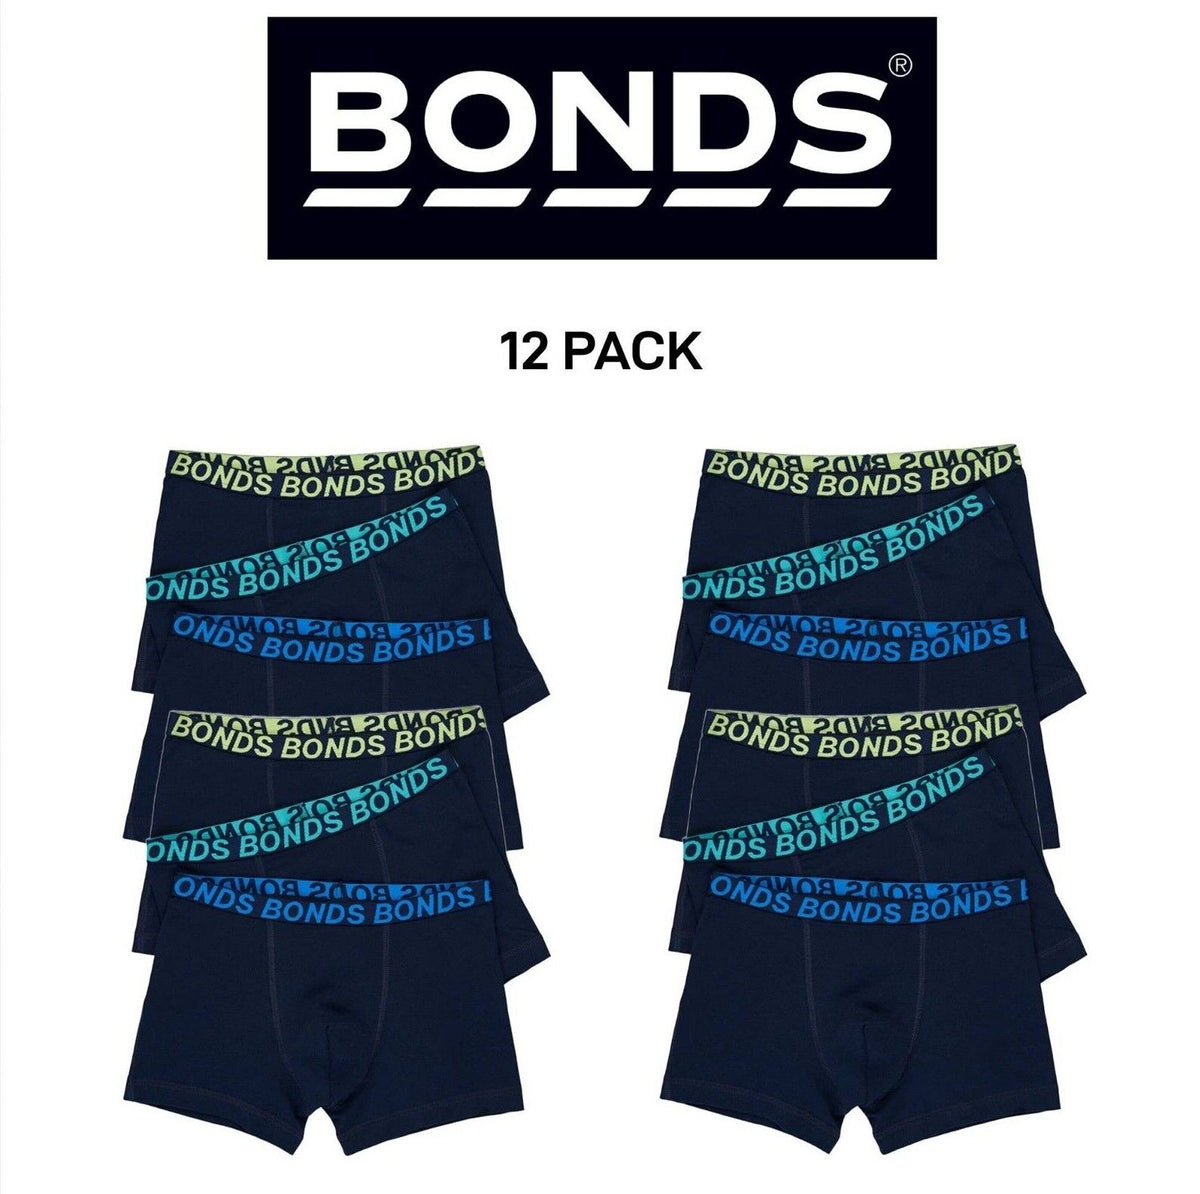 Bonds Boys Trunk Sport Moisture Wicking Cool Dry Comfort Covered 12 Pack UWKN3A